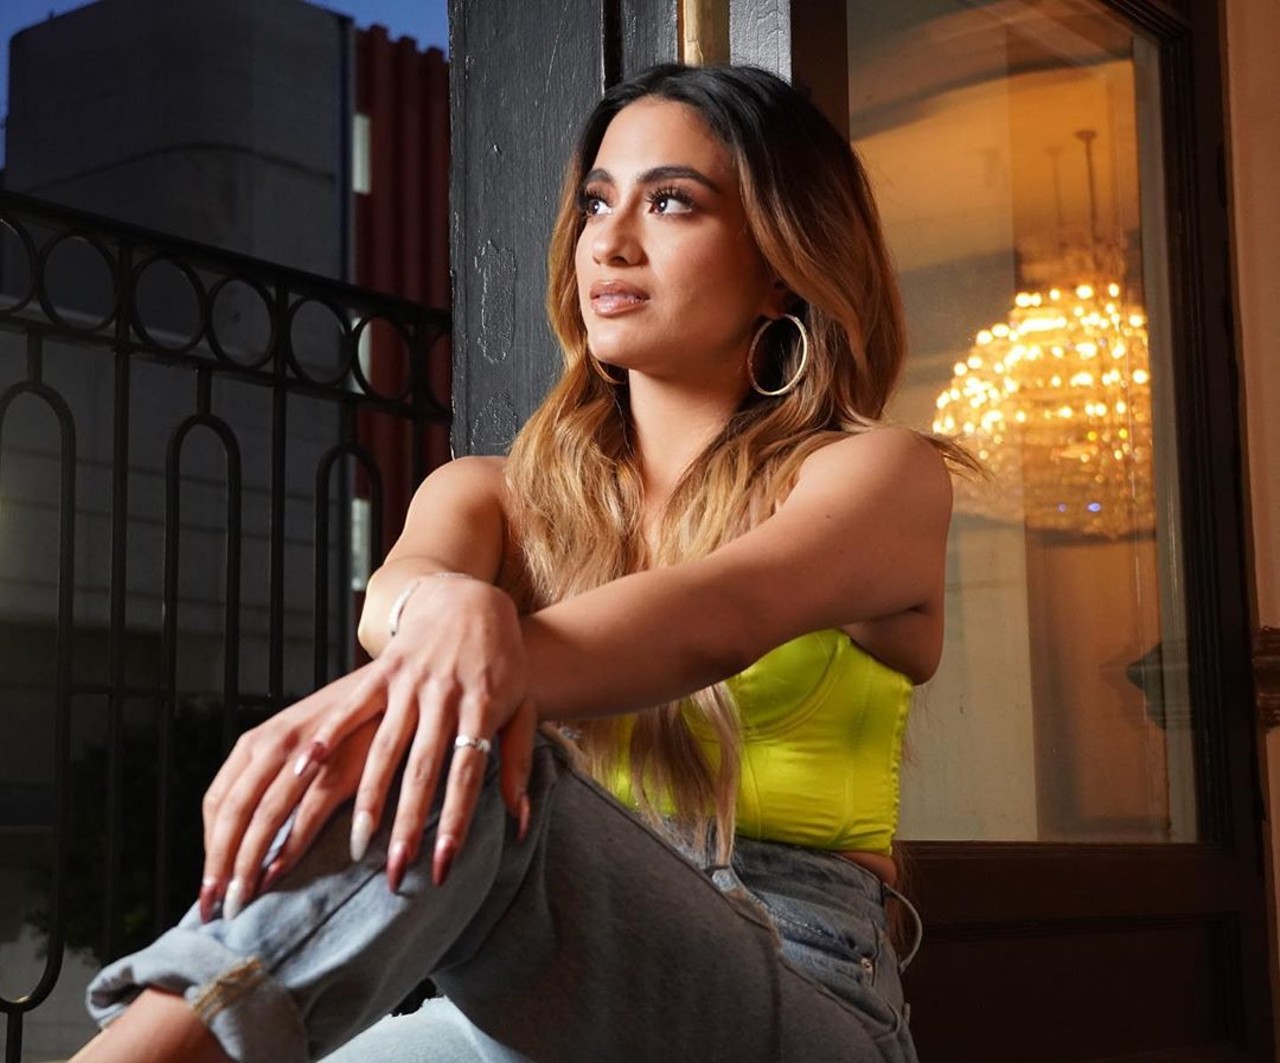 Ally Brooke
Brooke, who got her start with the girl group Fifth Harmony, was born in San Antonio and attended Cornerstone Christian Elementary School before home schooling her way to a diploma. She launched a solo career in 2017 and last year racked up a third-place finish on the 28th season of Dancing with the Stars.
Photo via Instagram / AllyBrooke